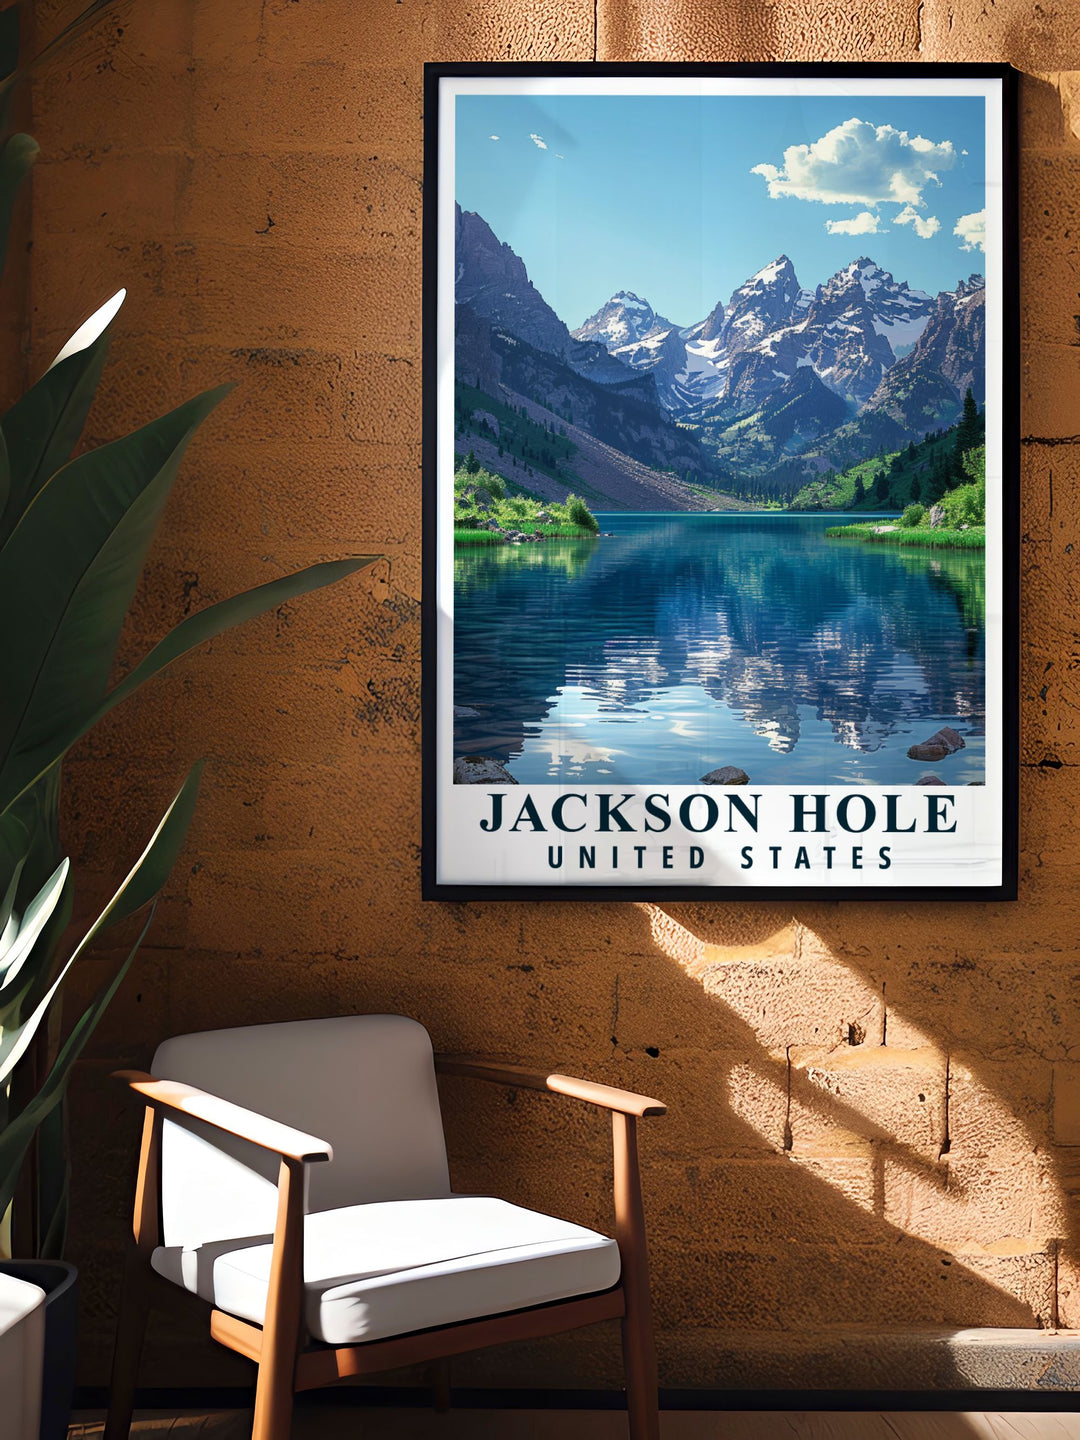 This poster showcases the excitement of Jackson Hole and the breathtaking scenery of Grand Teton National Park, making it perfect for adventure enthusiasts.